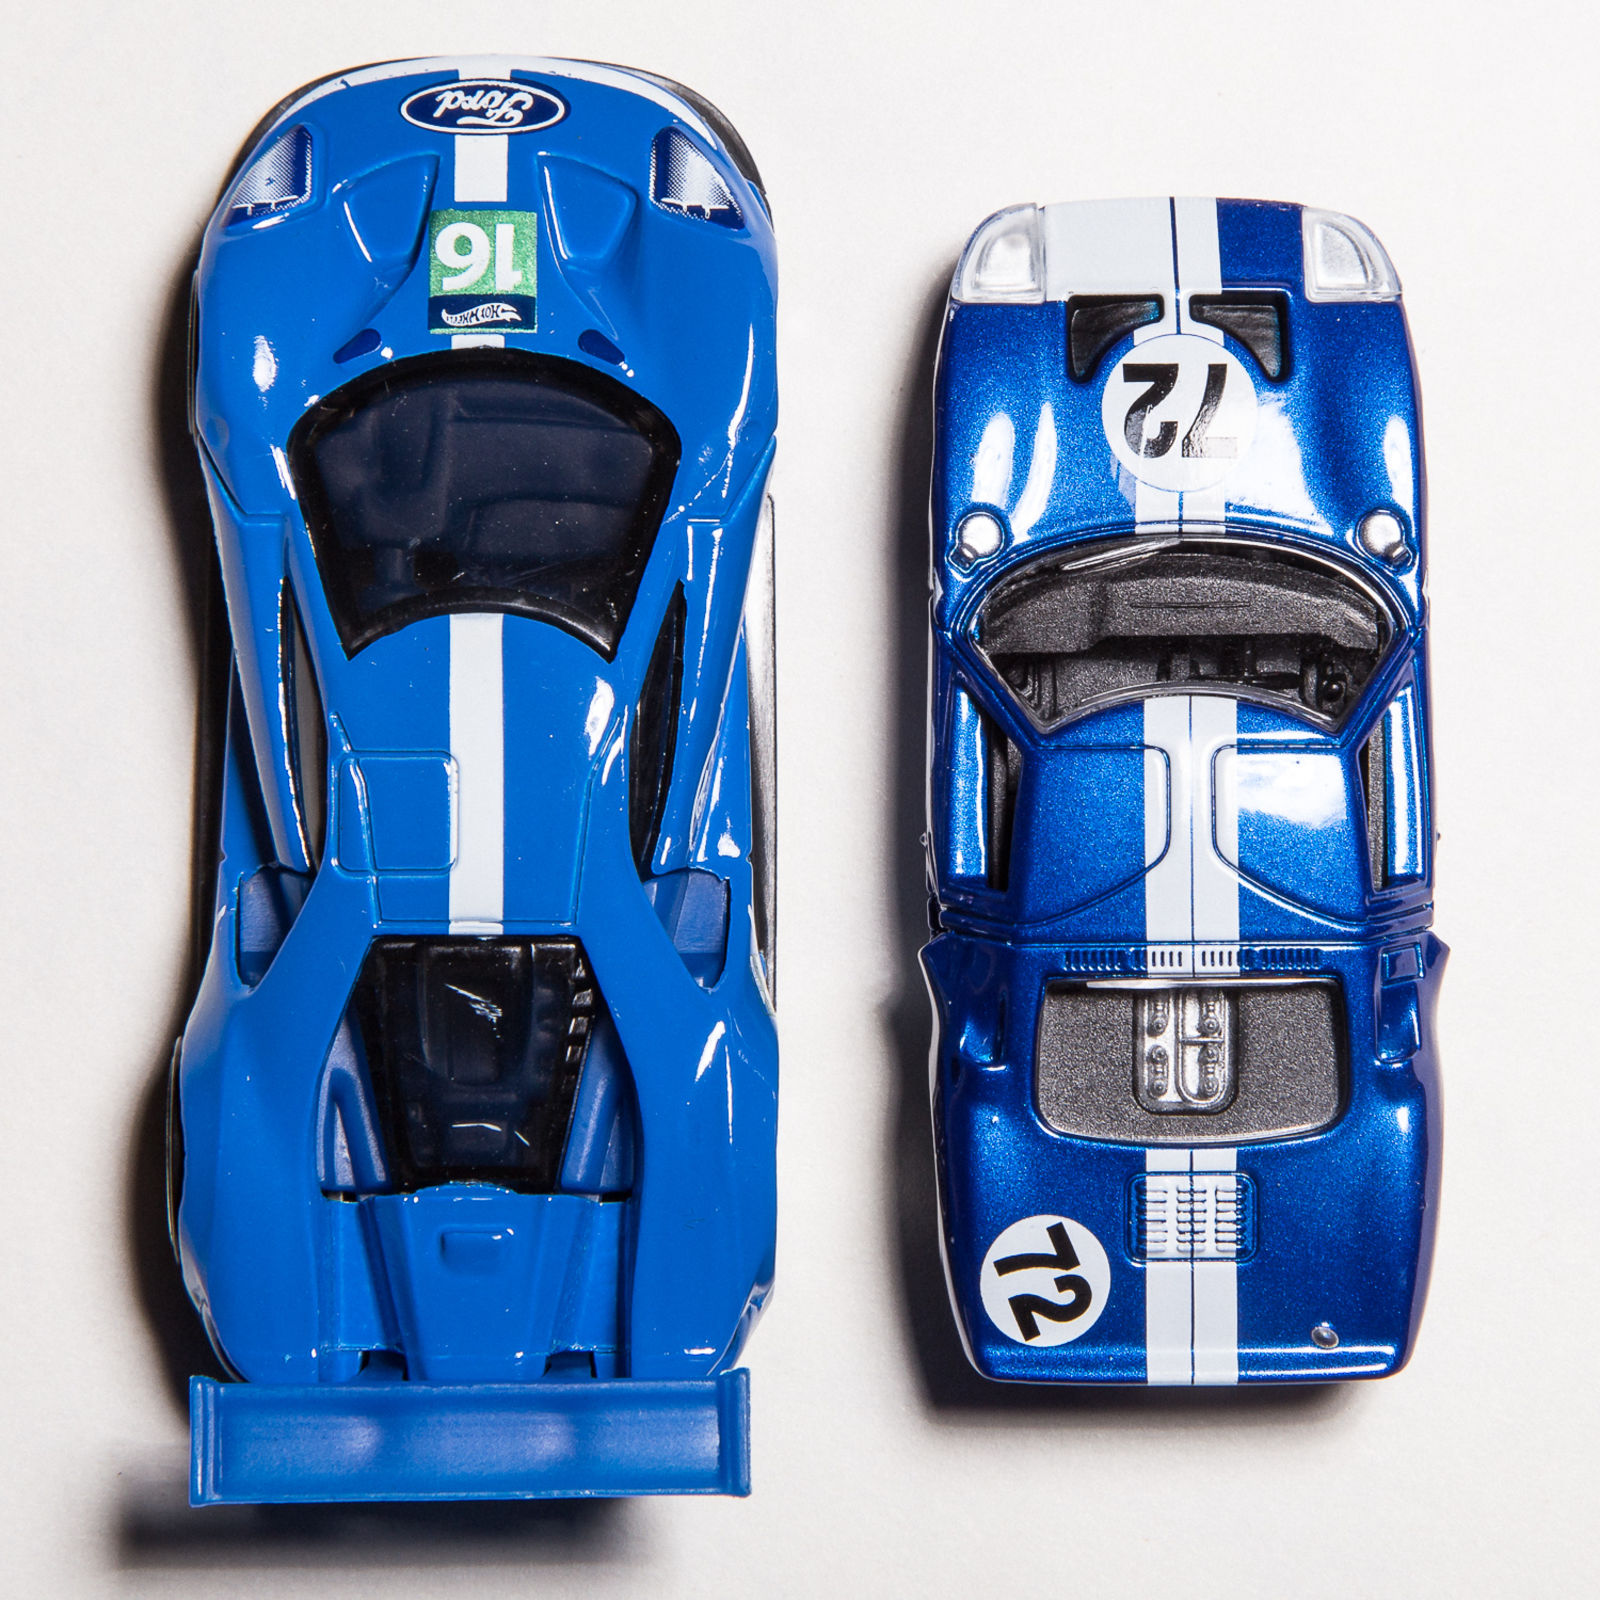 Illustration for article titled New  Old, Big  Small—Ford GT/GT40